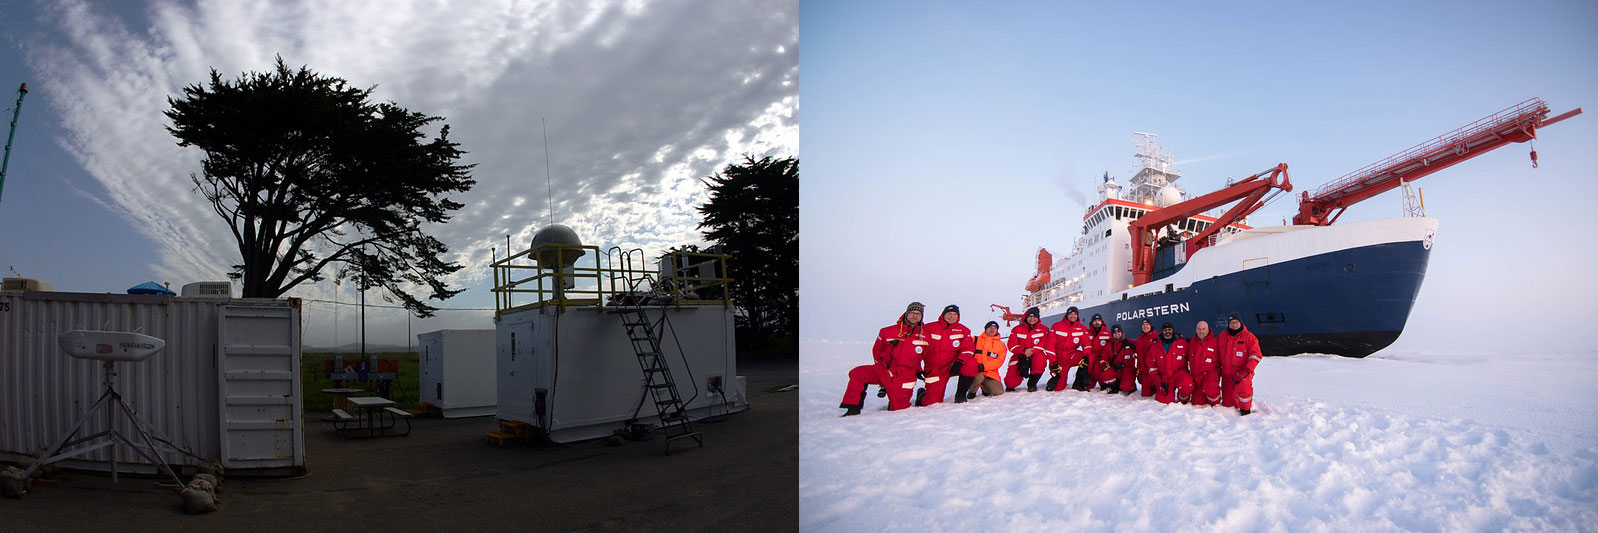 The left photo shows mobile facility instruments and containers in Northern California. The right photo shows the ARM installation team members kneeling on ice in front of the blue, white, and orange Polarstern.